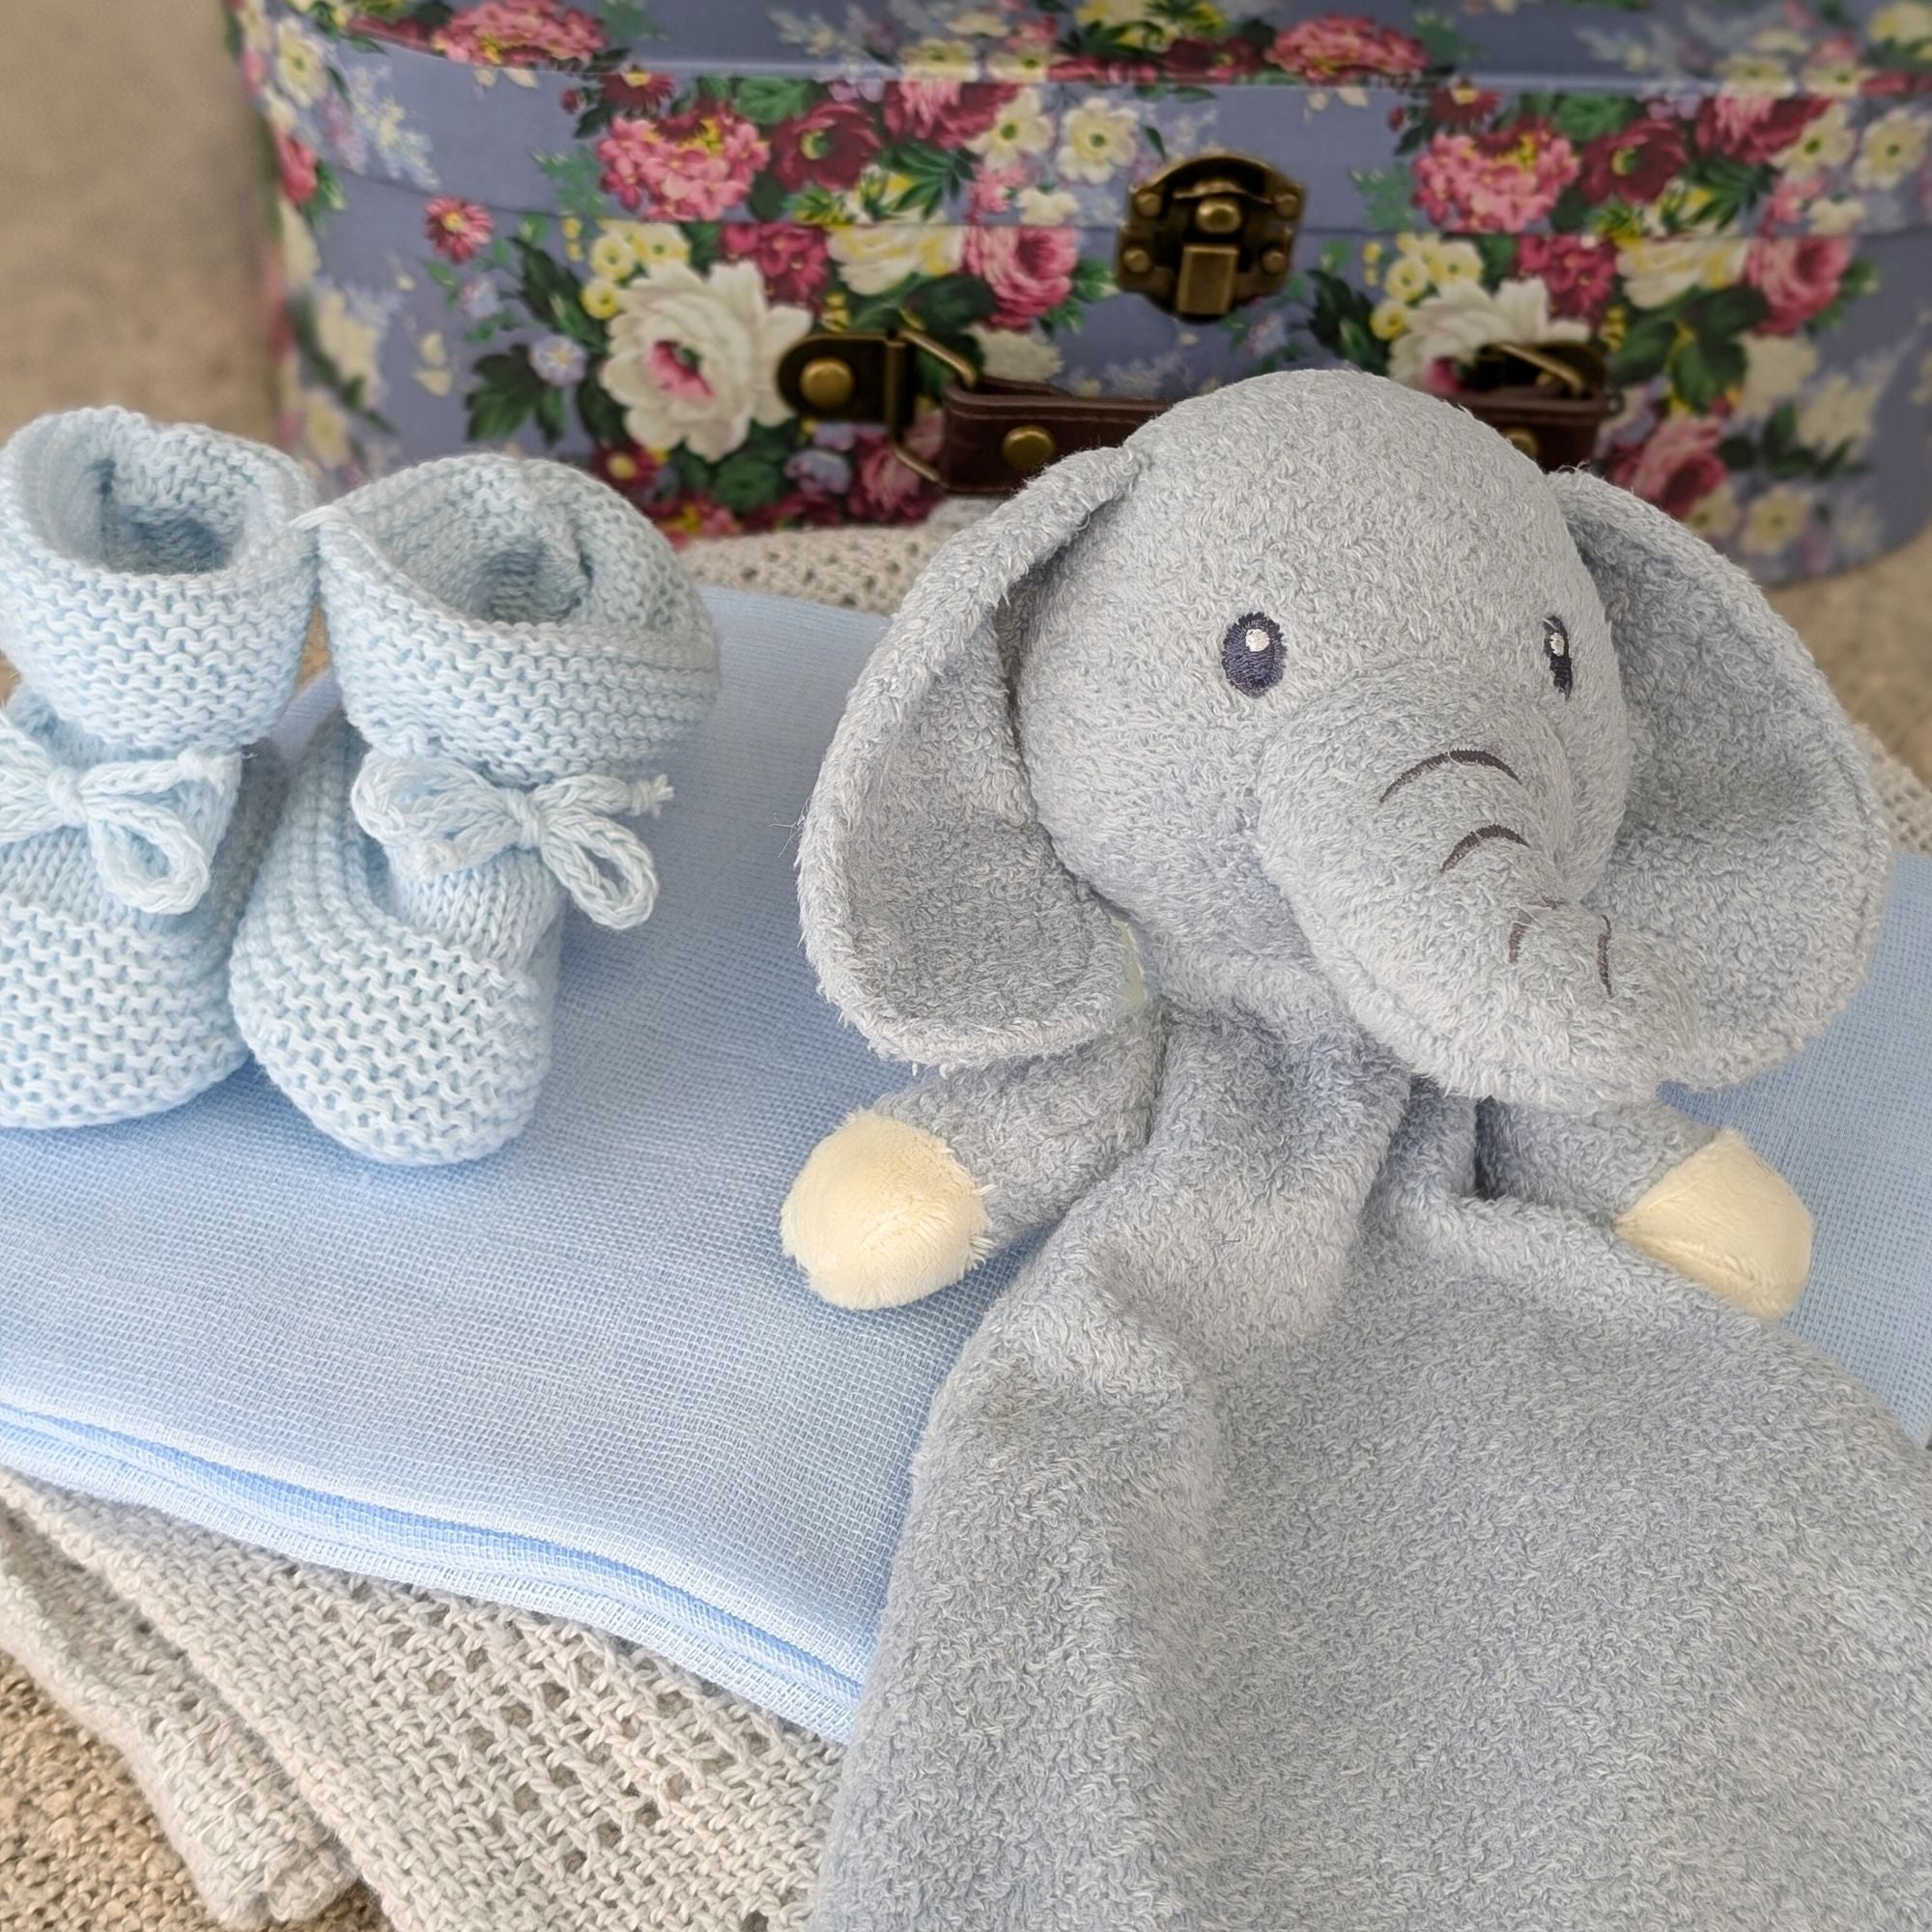 baby gifts hamper in blue with grey blanket, blue bib, blue booties, scratch mittens and elephant comforter blanket.